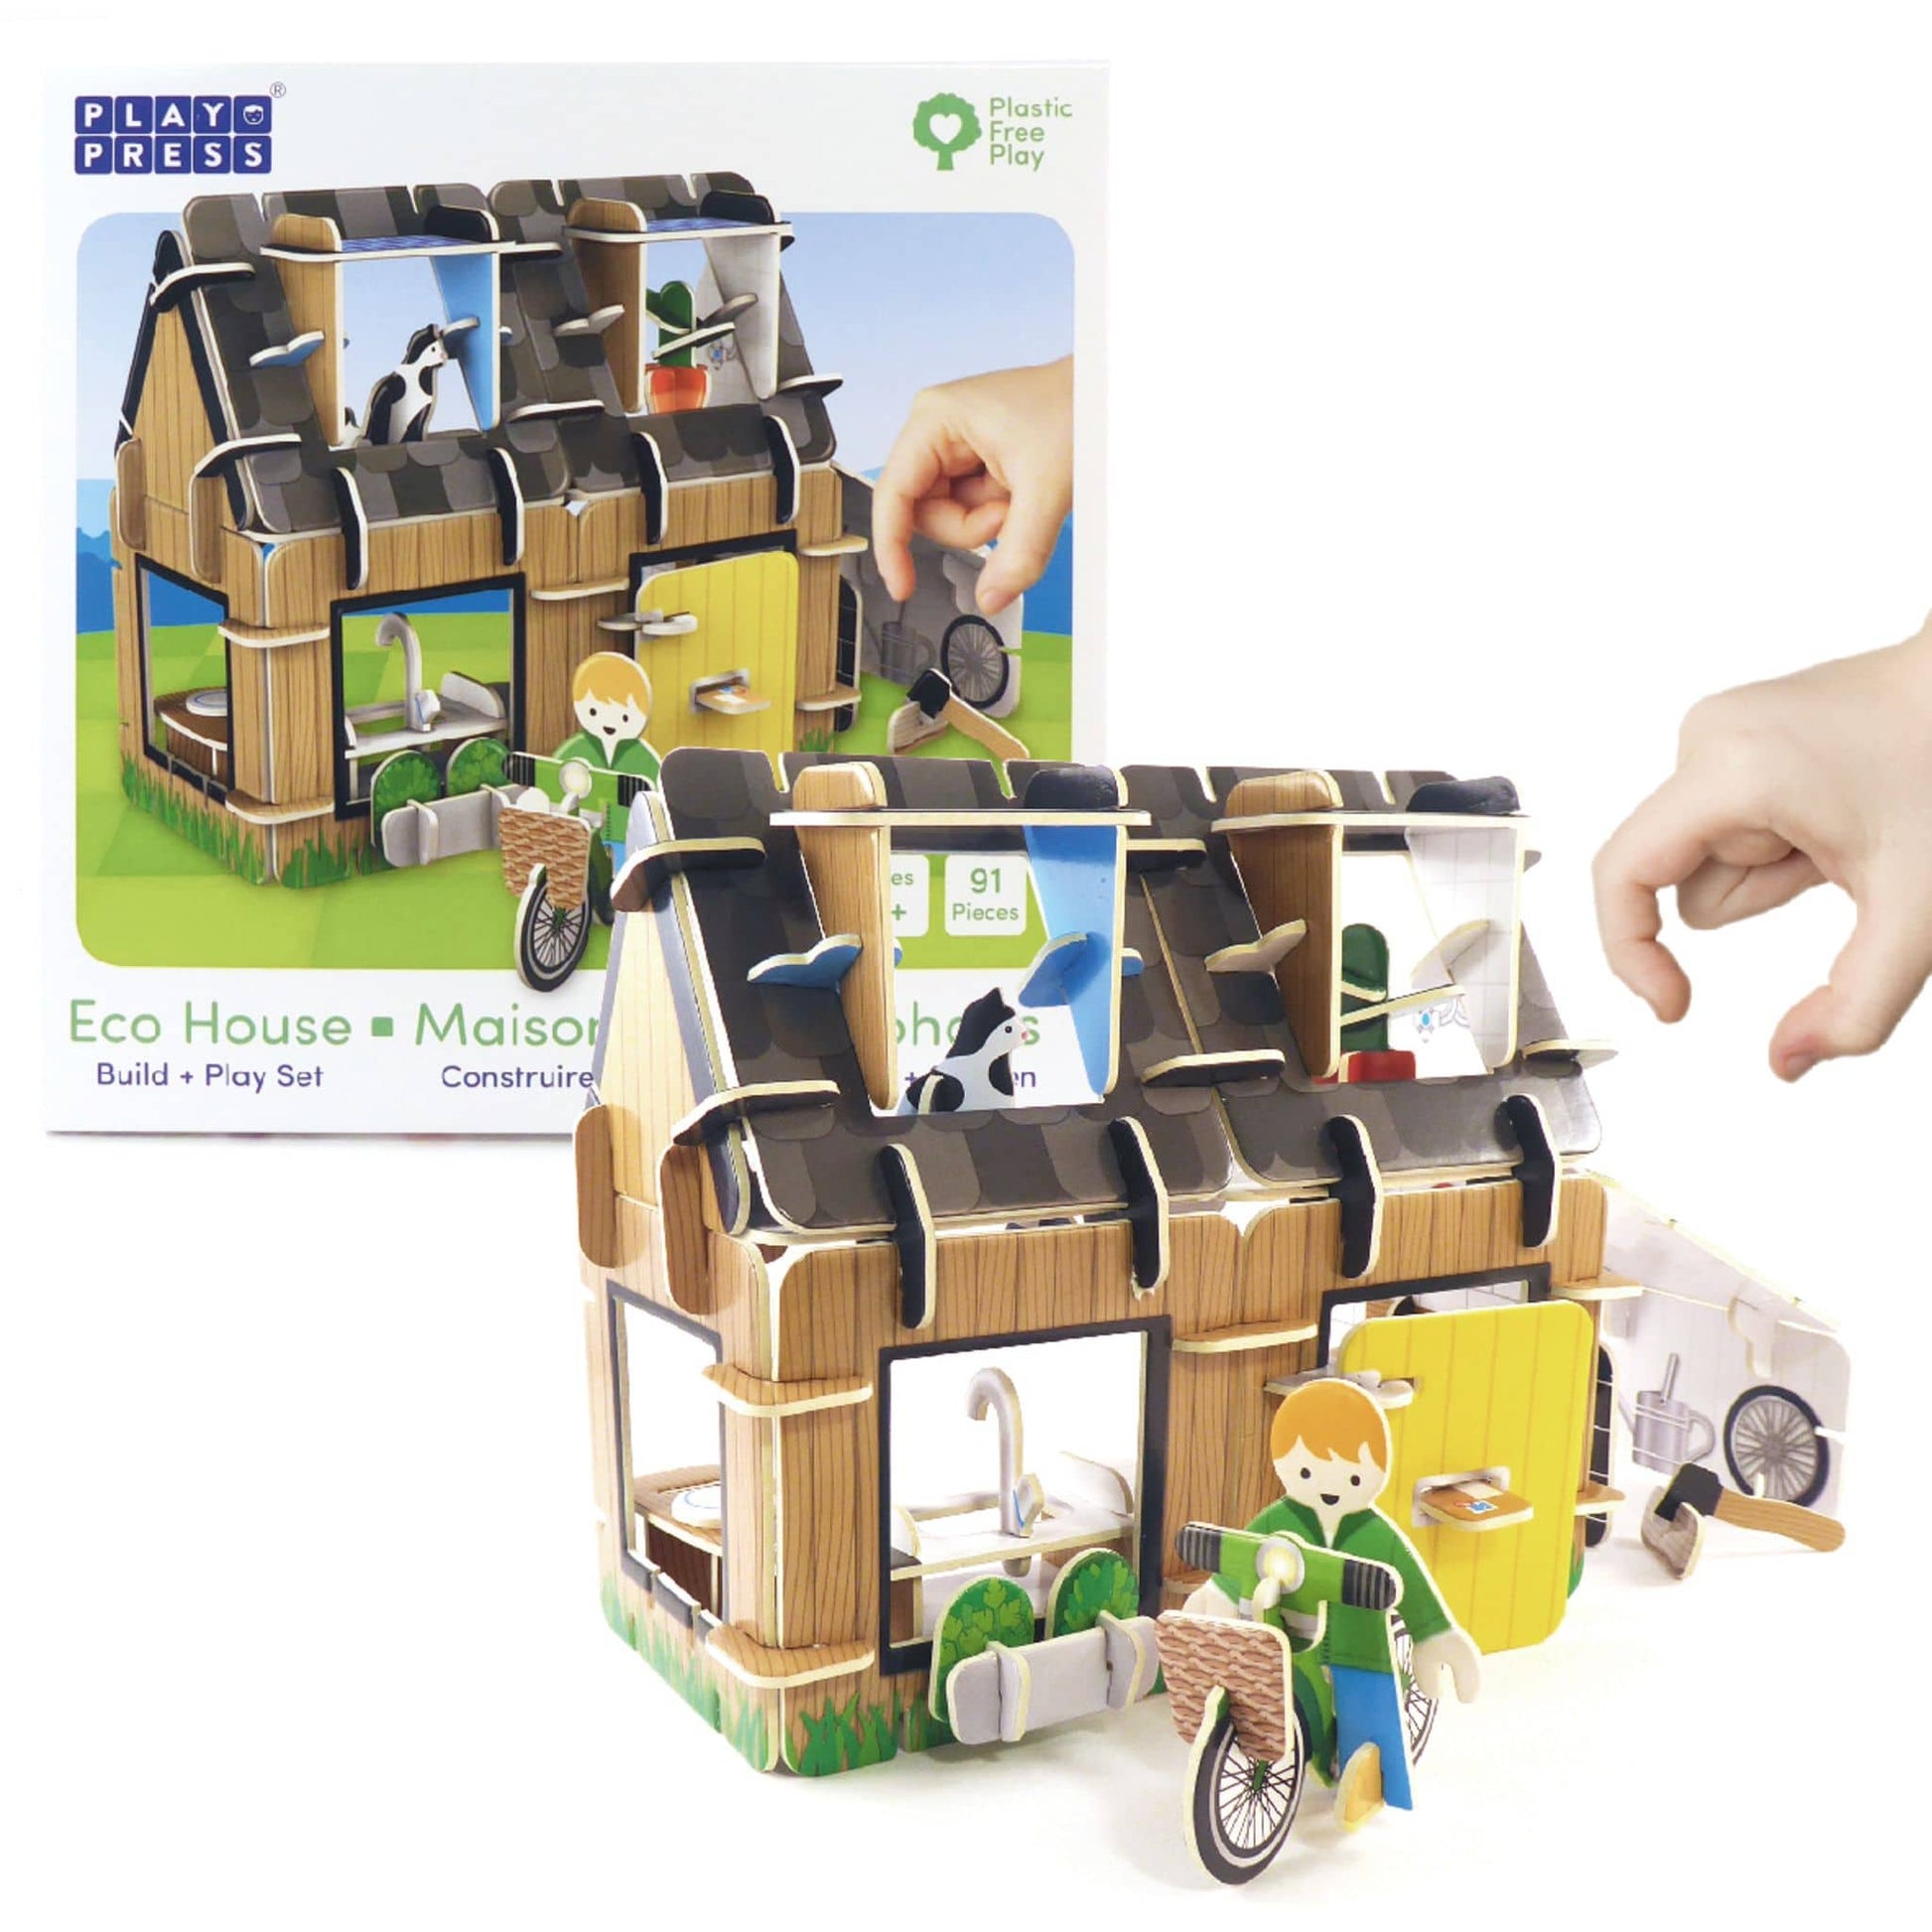 Build and Play Eco House Play Set with box